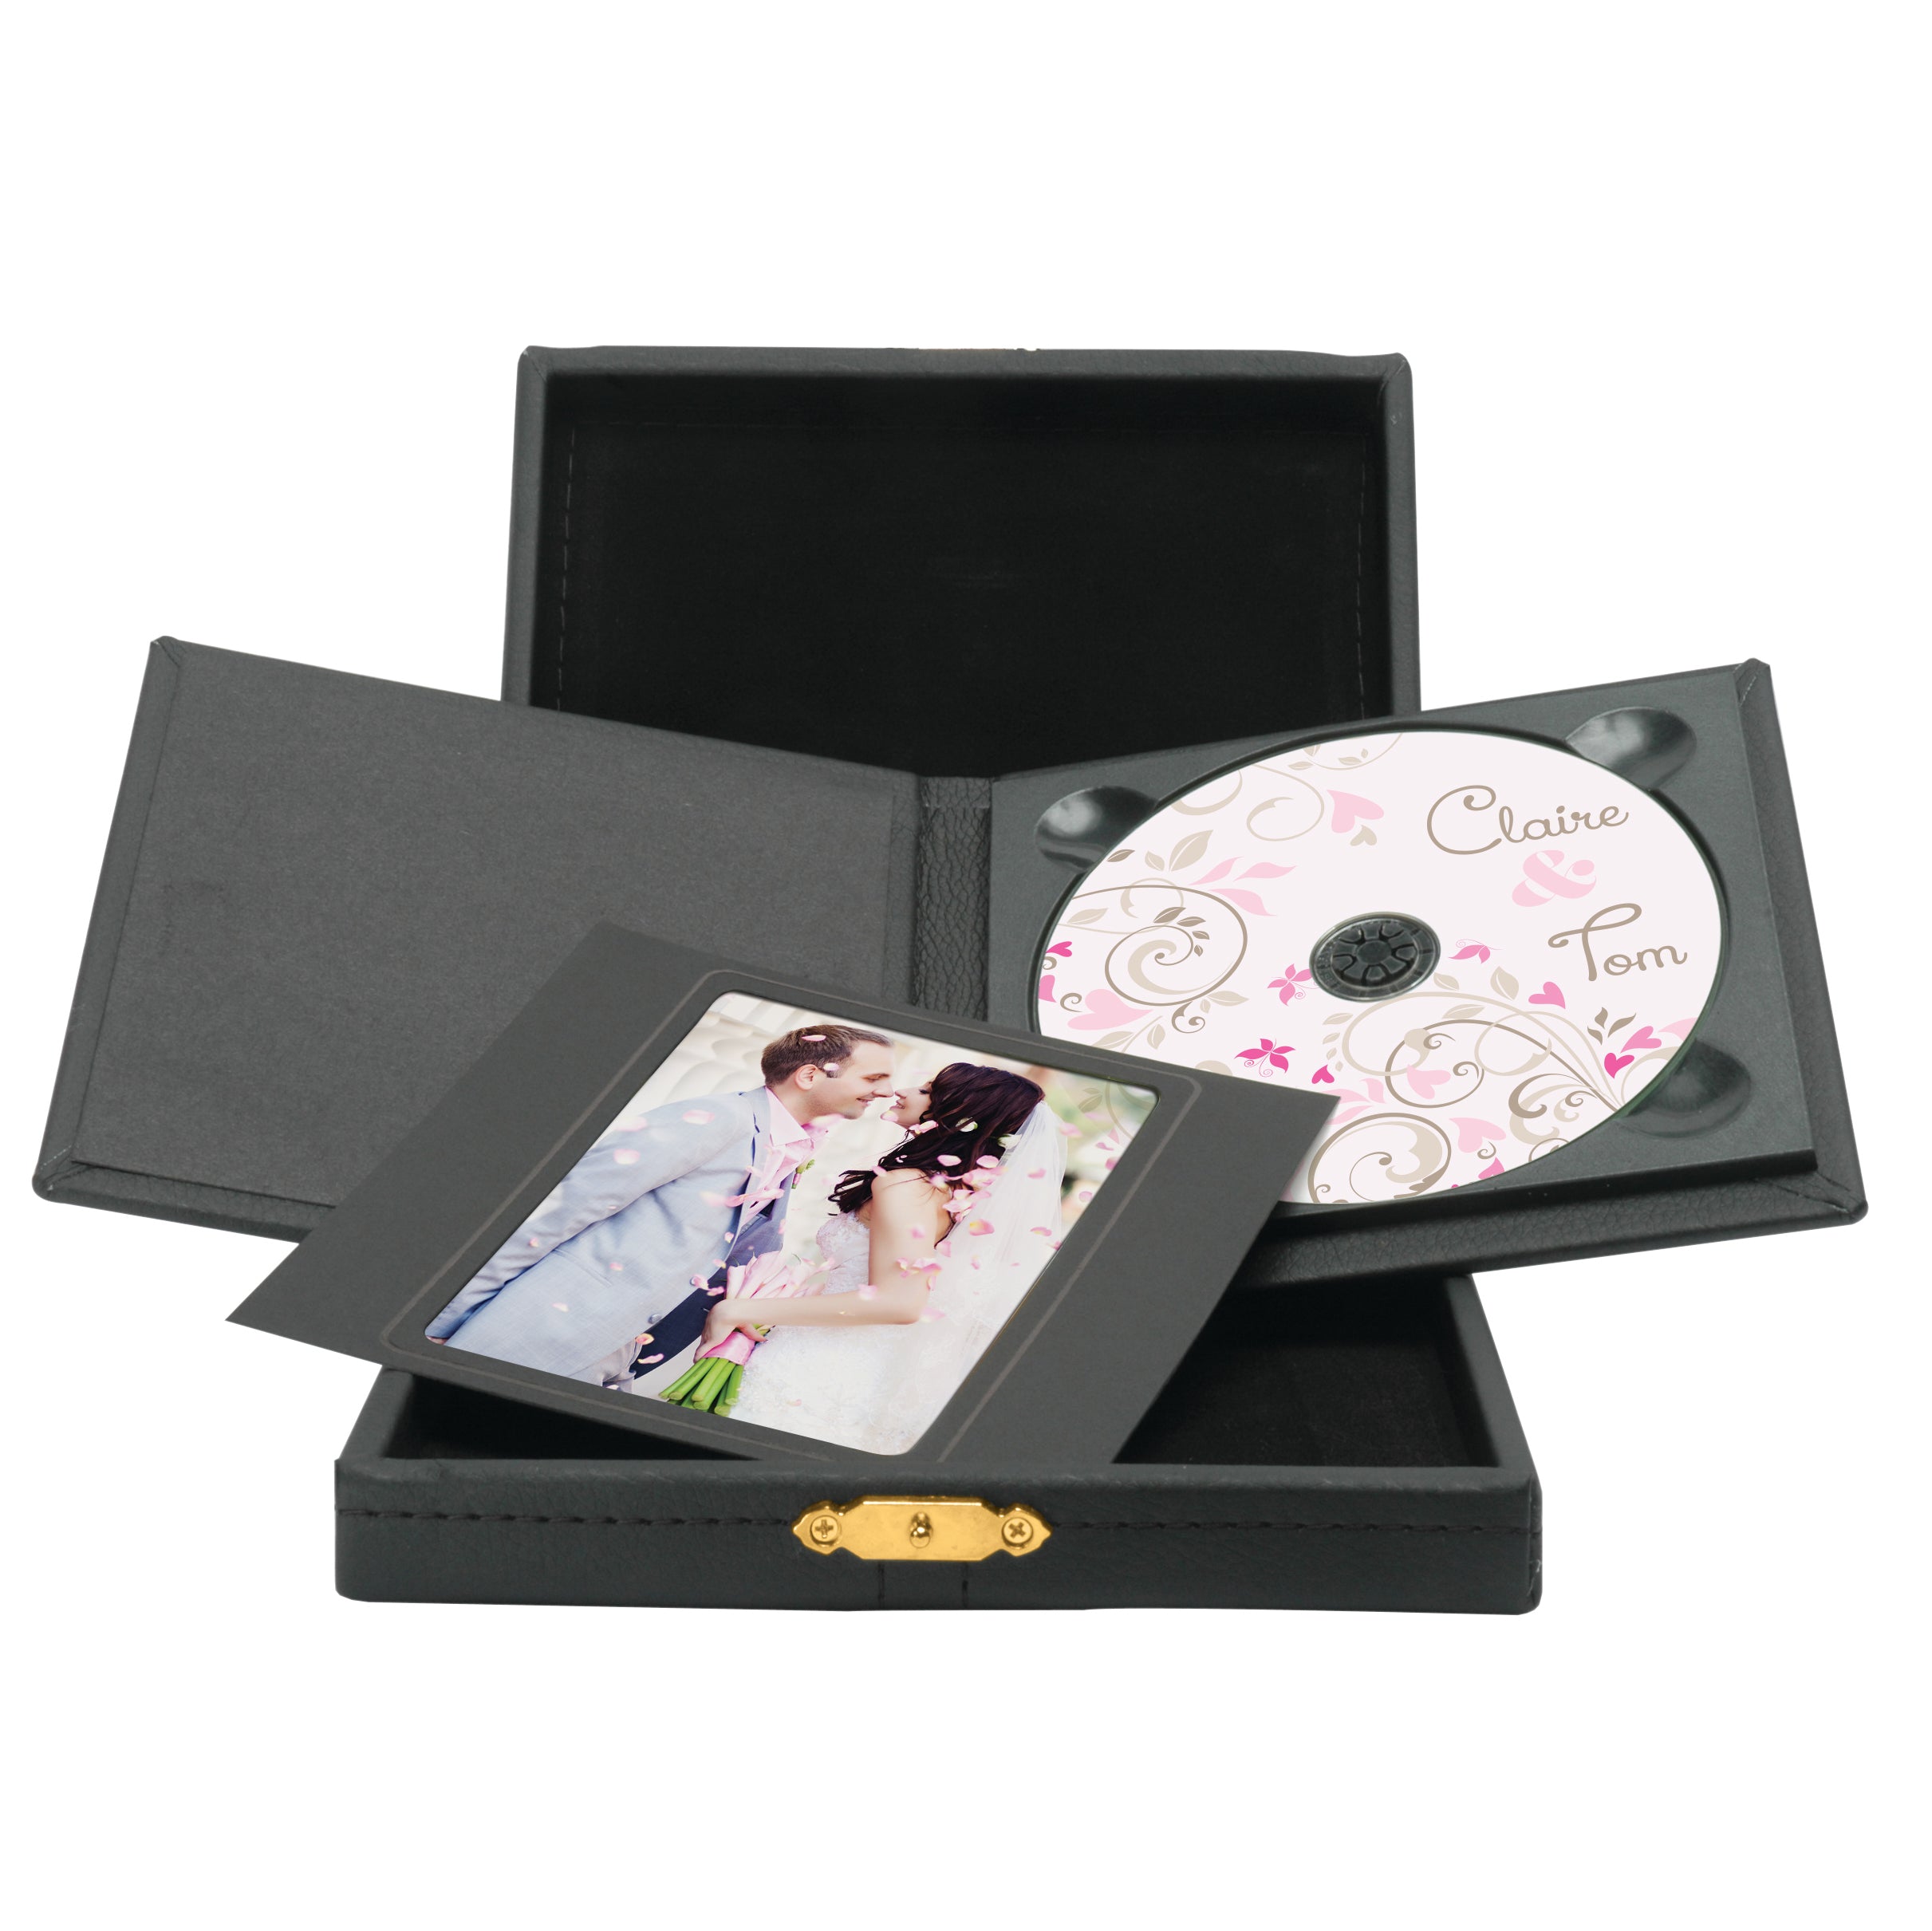 Deluxe DVD/CD Folio with Leatherette Box